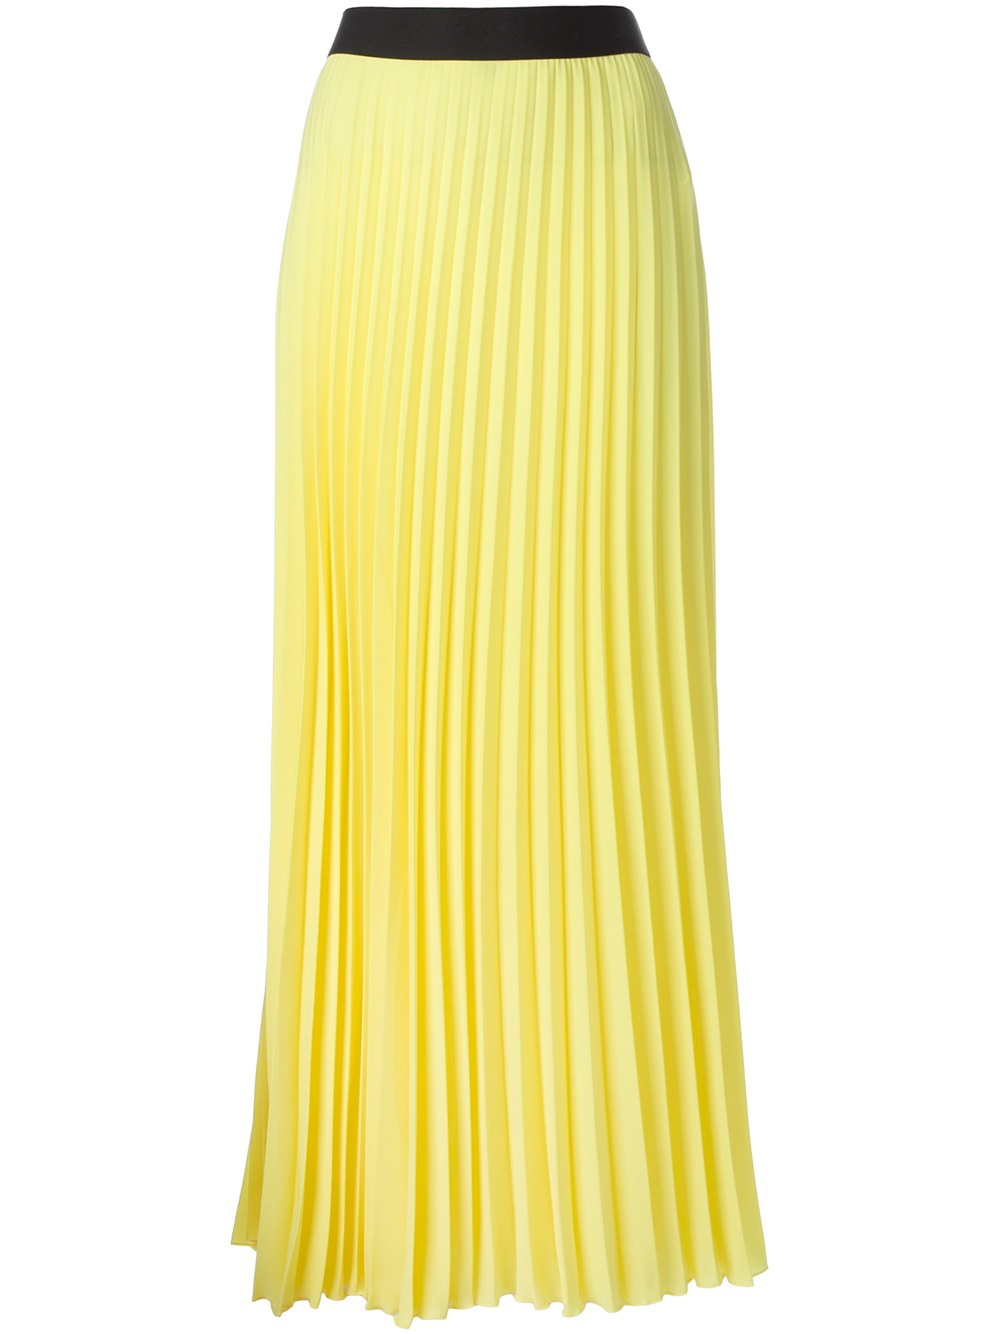 Lyst - P.A.R.O.S.H. Pleated Skirt in Yellow